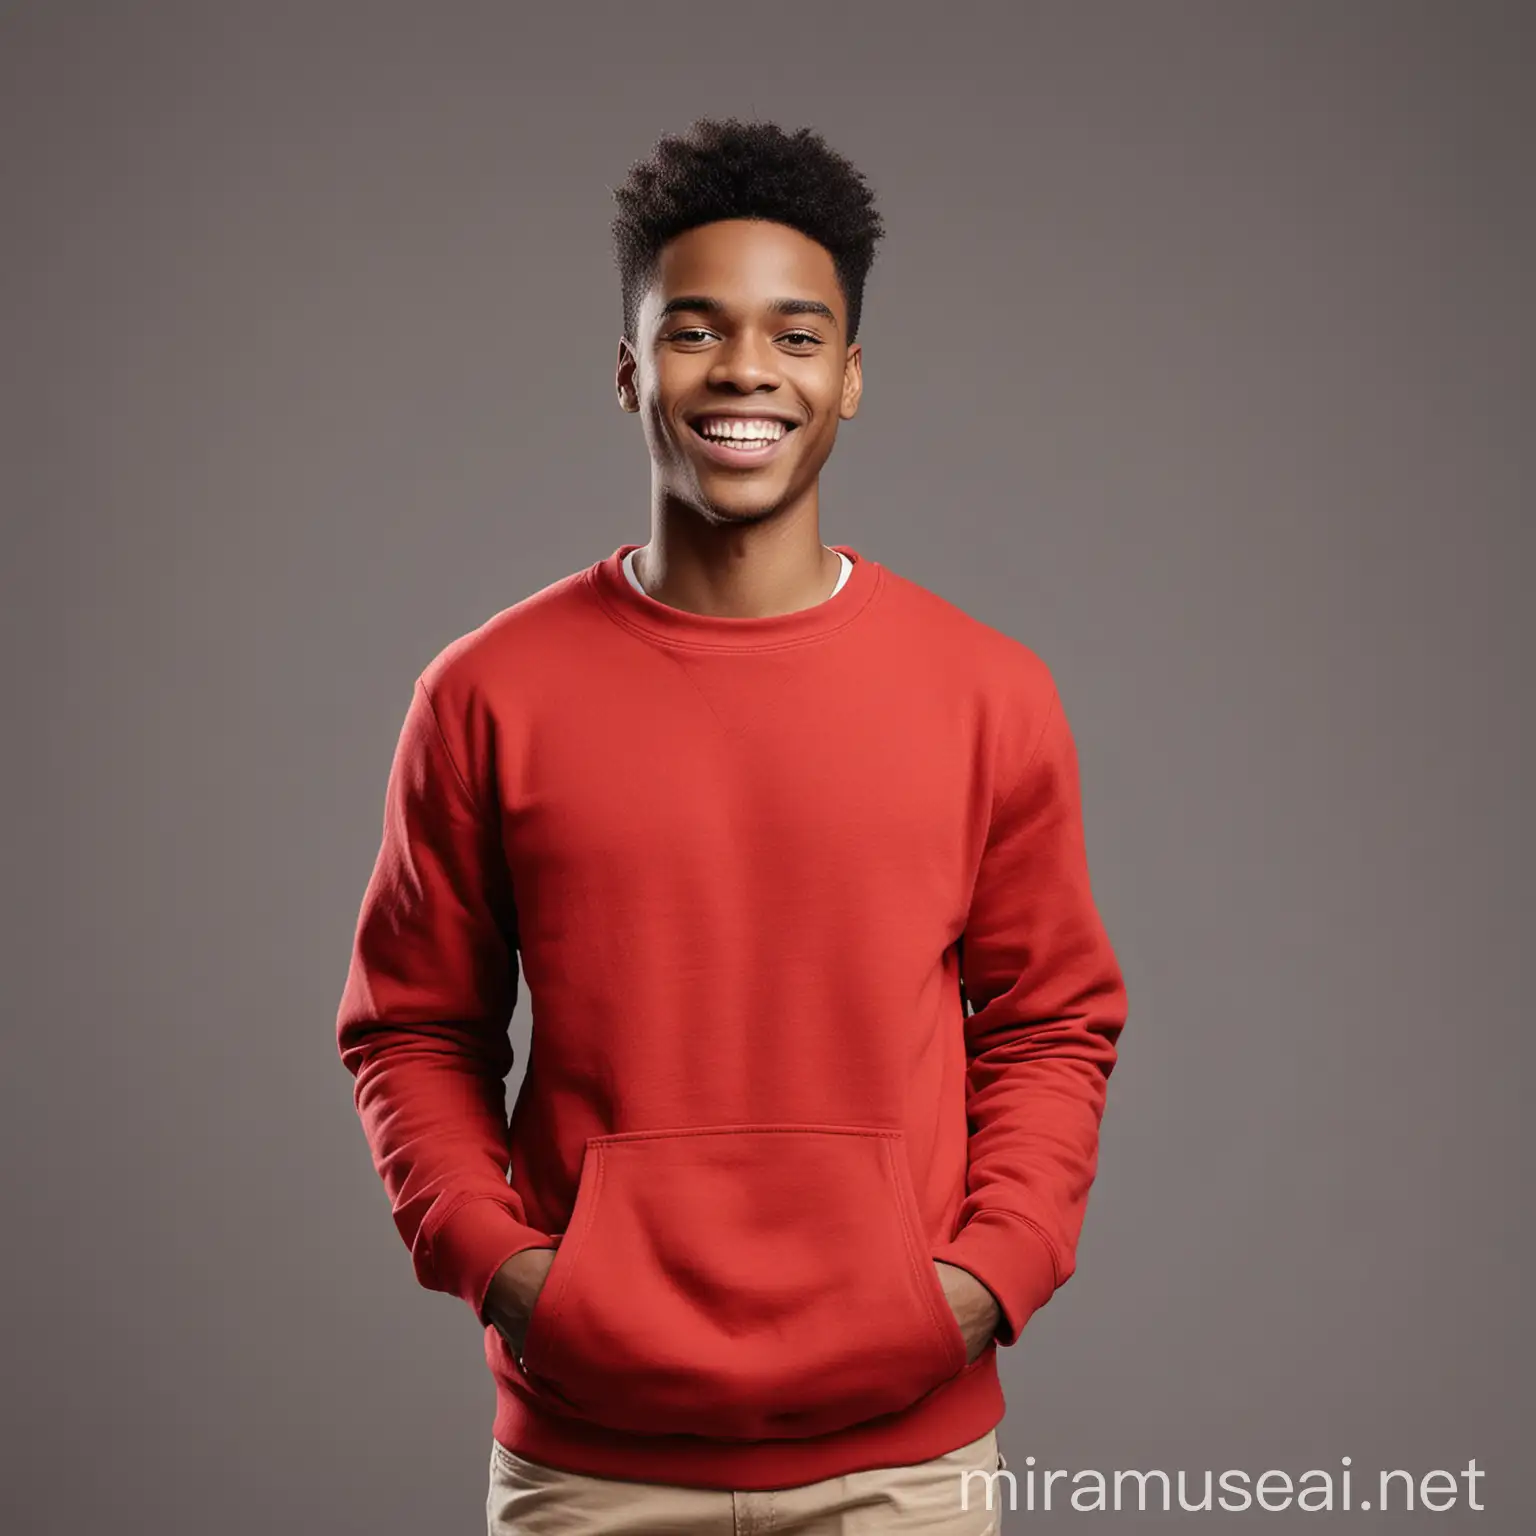 handsome African American young man , putting on red sweatshirt , cheerfully smiling at camera , standing straight with hands in pockets,against gray background space , facing camera